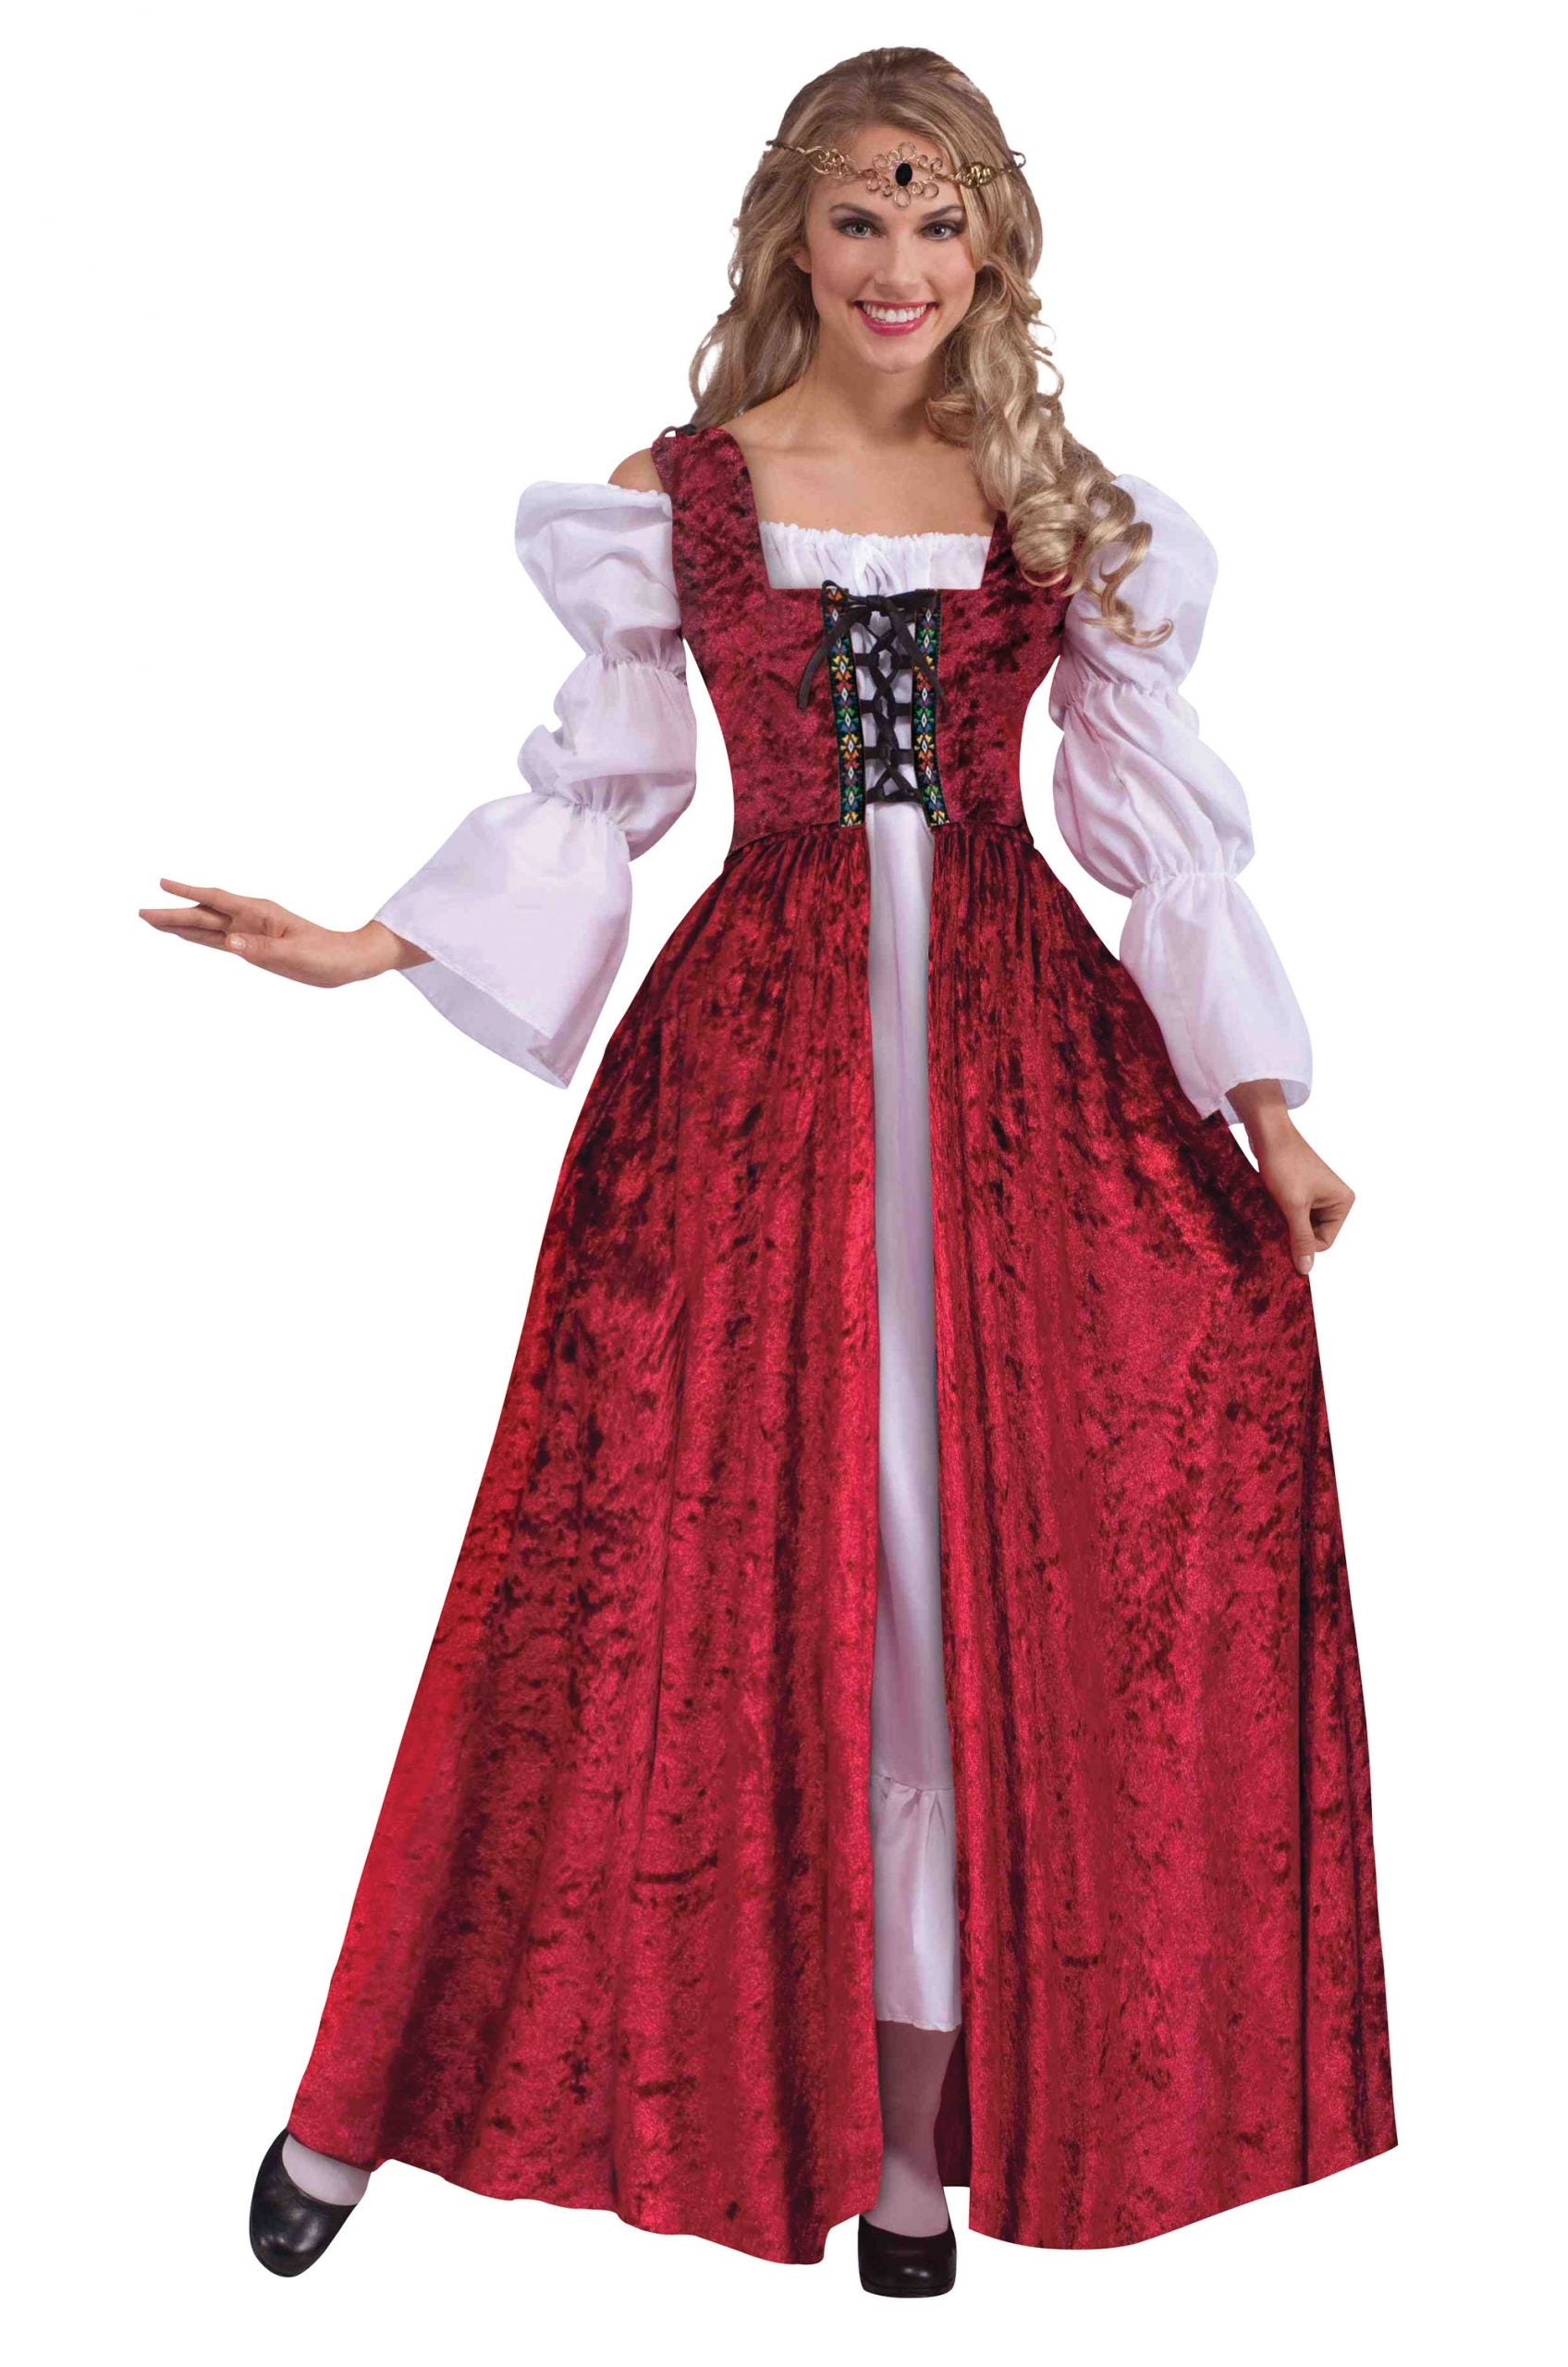 Medieval Lace up Gown costume dress